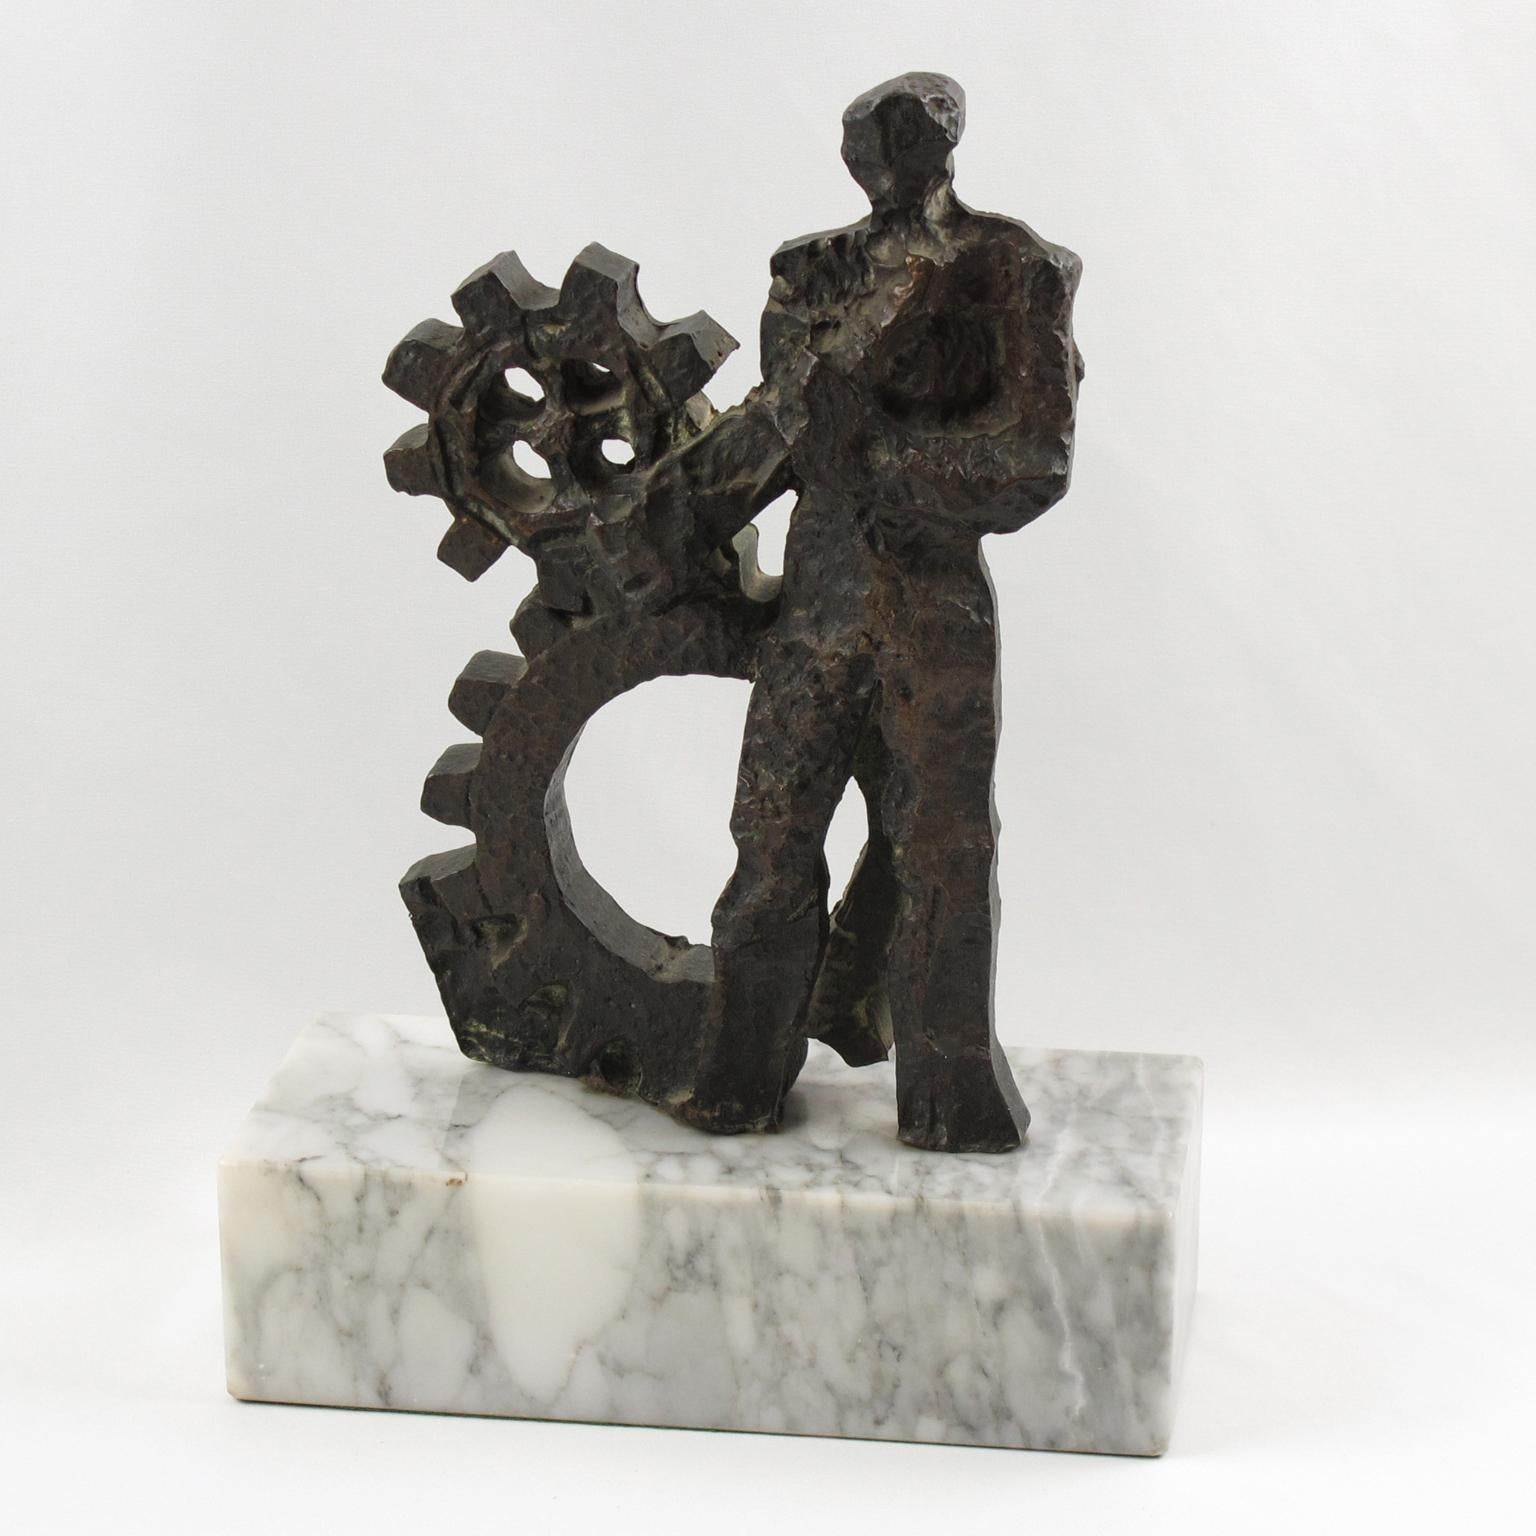 Man and Machine, Brutalist Bronze Sculpture on Marble Base, 1970s - Gold Figurative Sculpture by Unknown